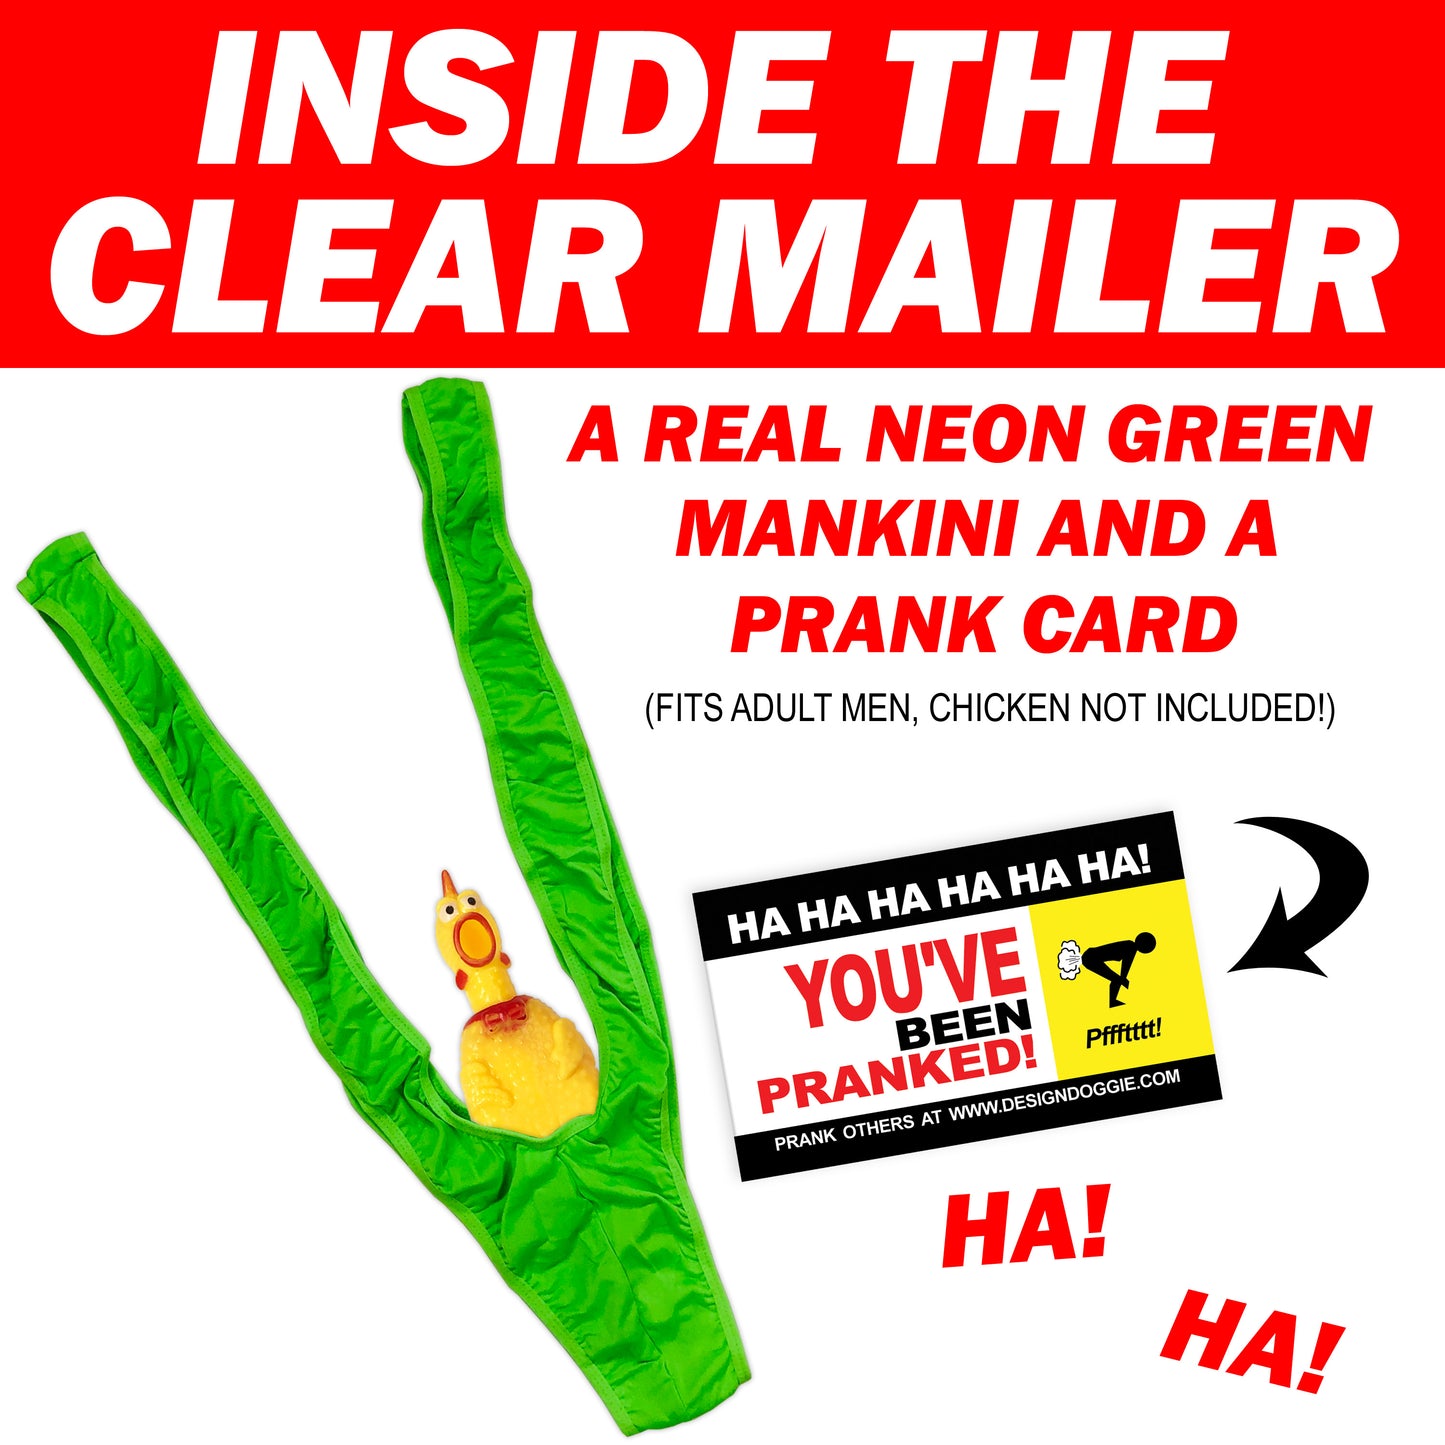 Sausage Sock embarrassing clear prank envelope gets mailed directly to your victims 100% anonymously!